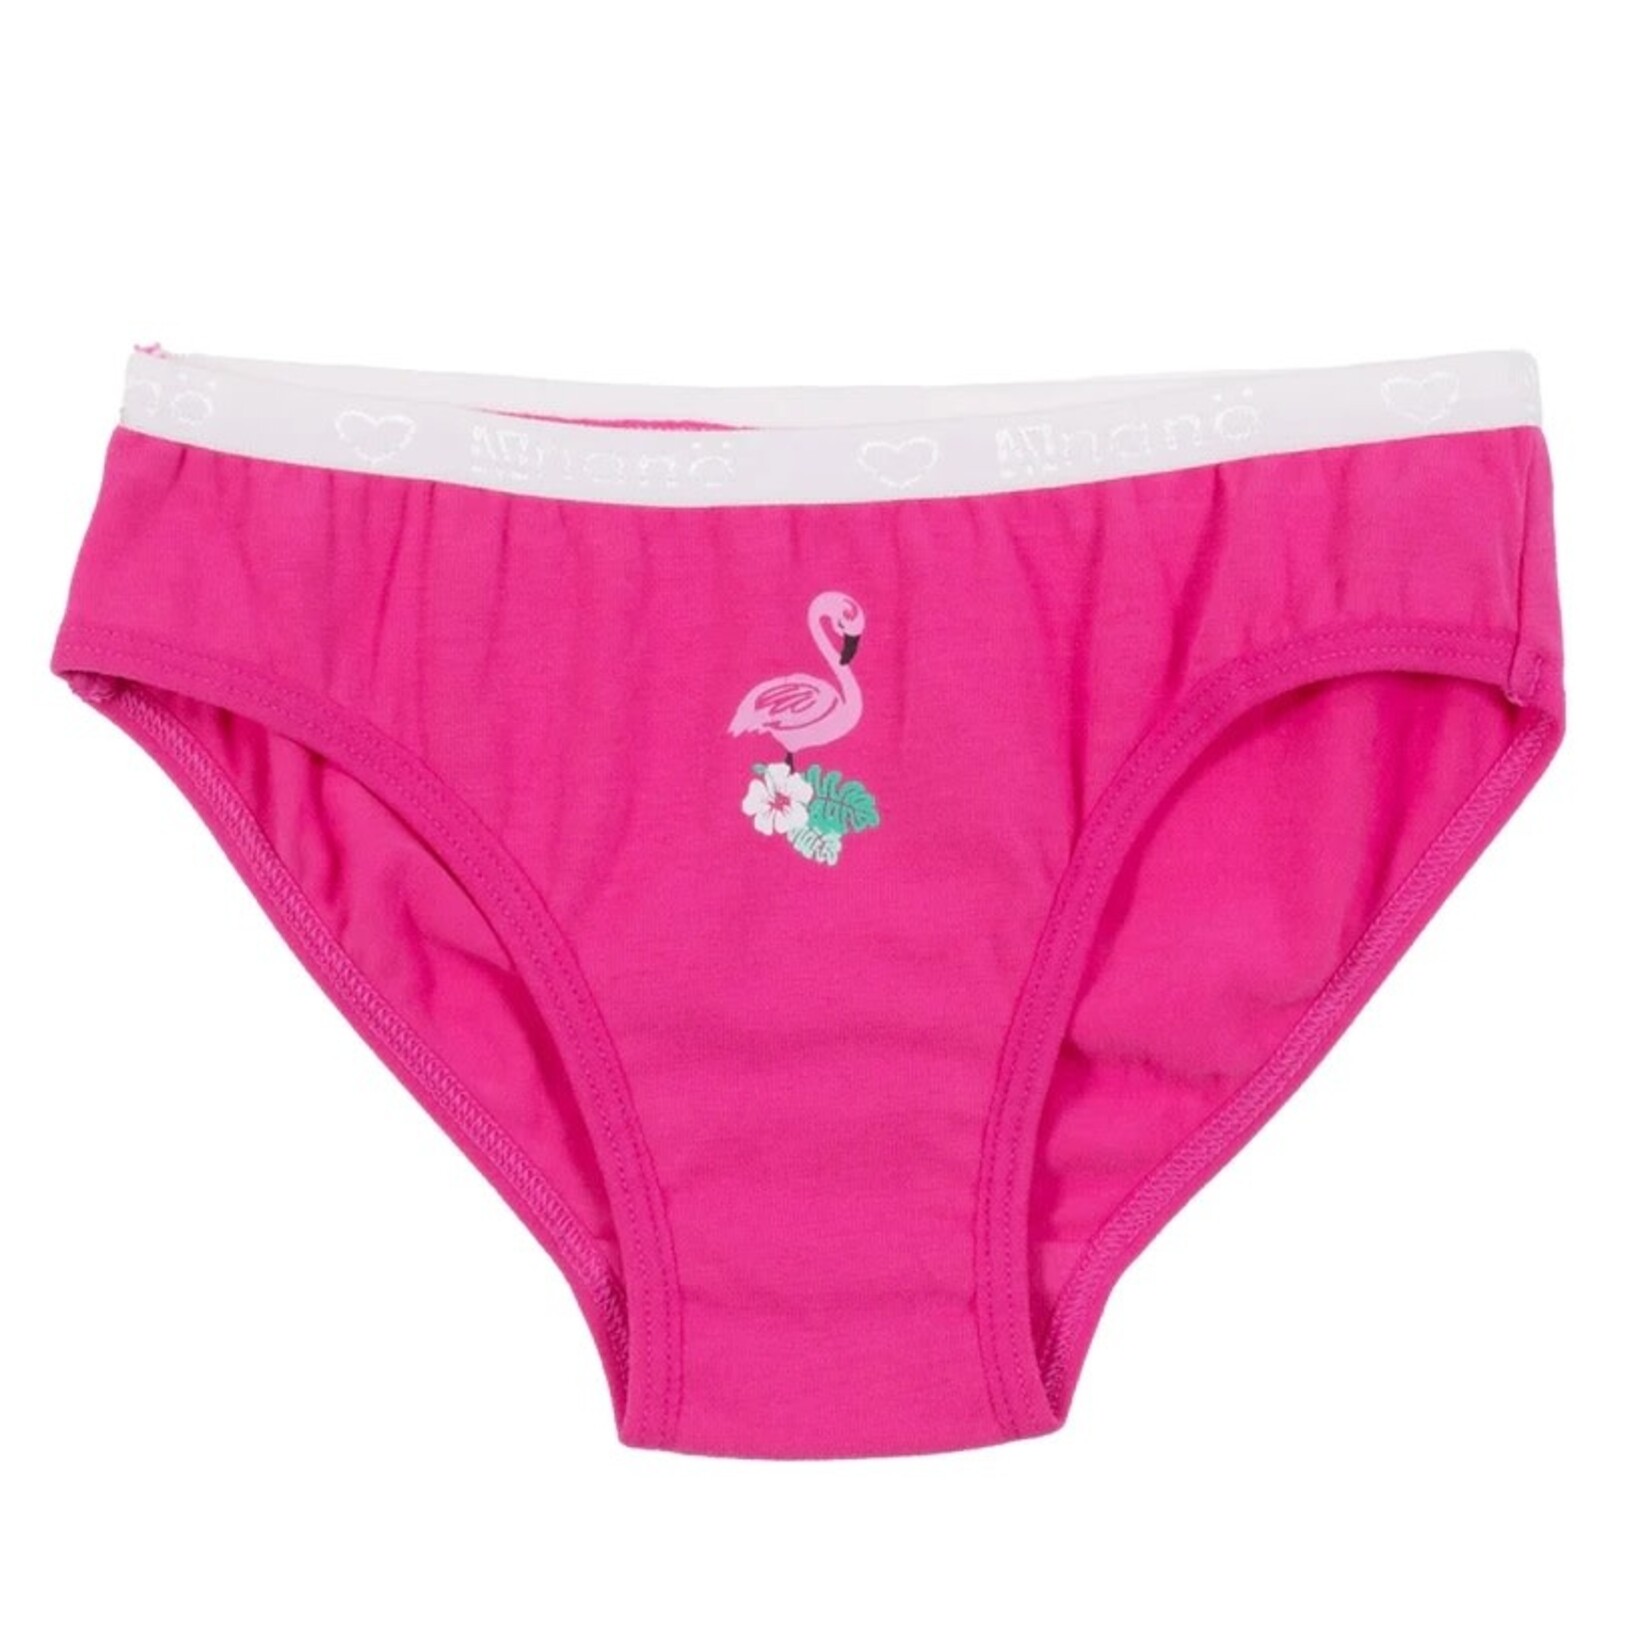 Nanö NANÖ - Pack of 3 Underwear 'Flamingos/Green with white flowers'